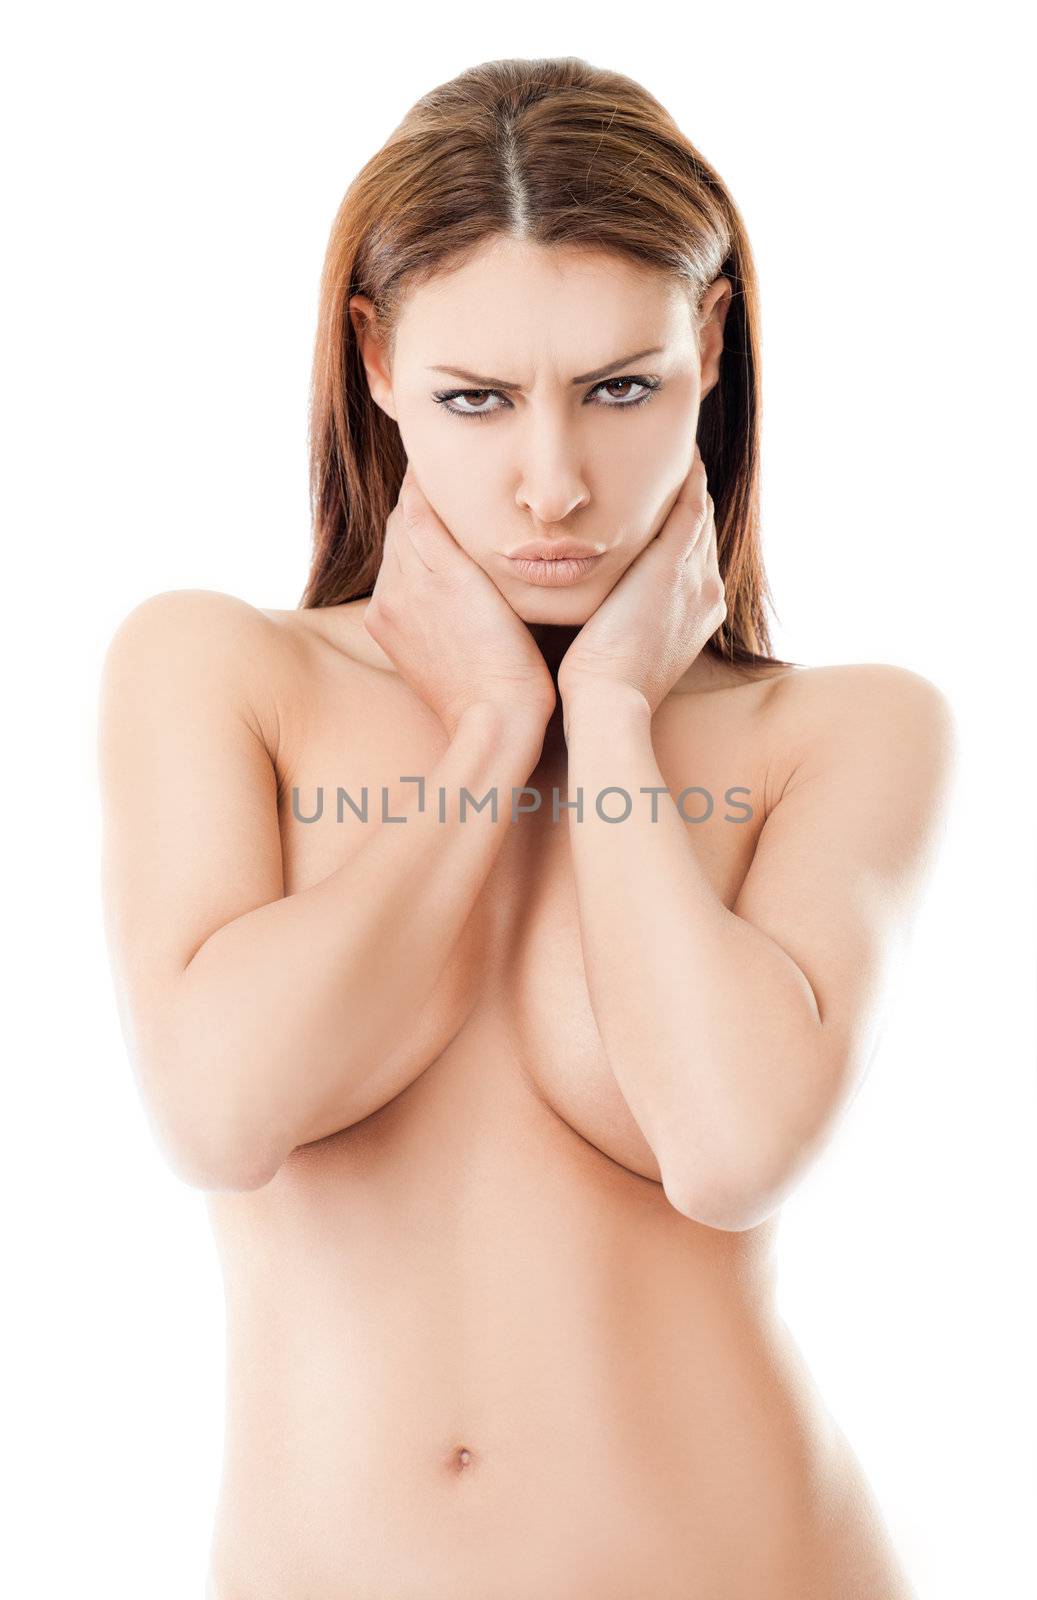 Beautiful naked female with hands on breasts, making sulky face